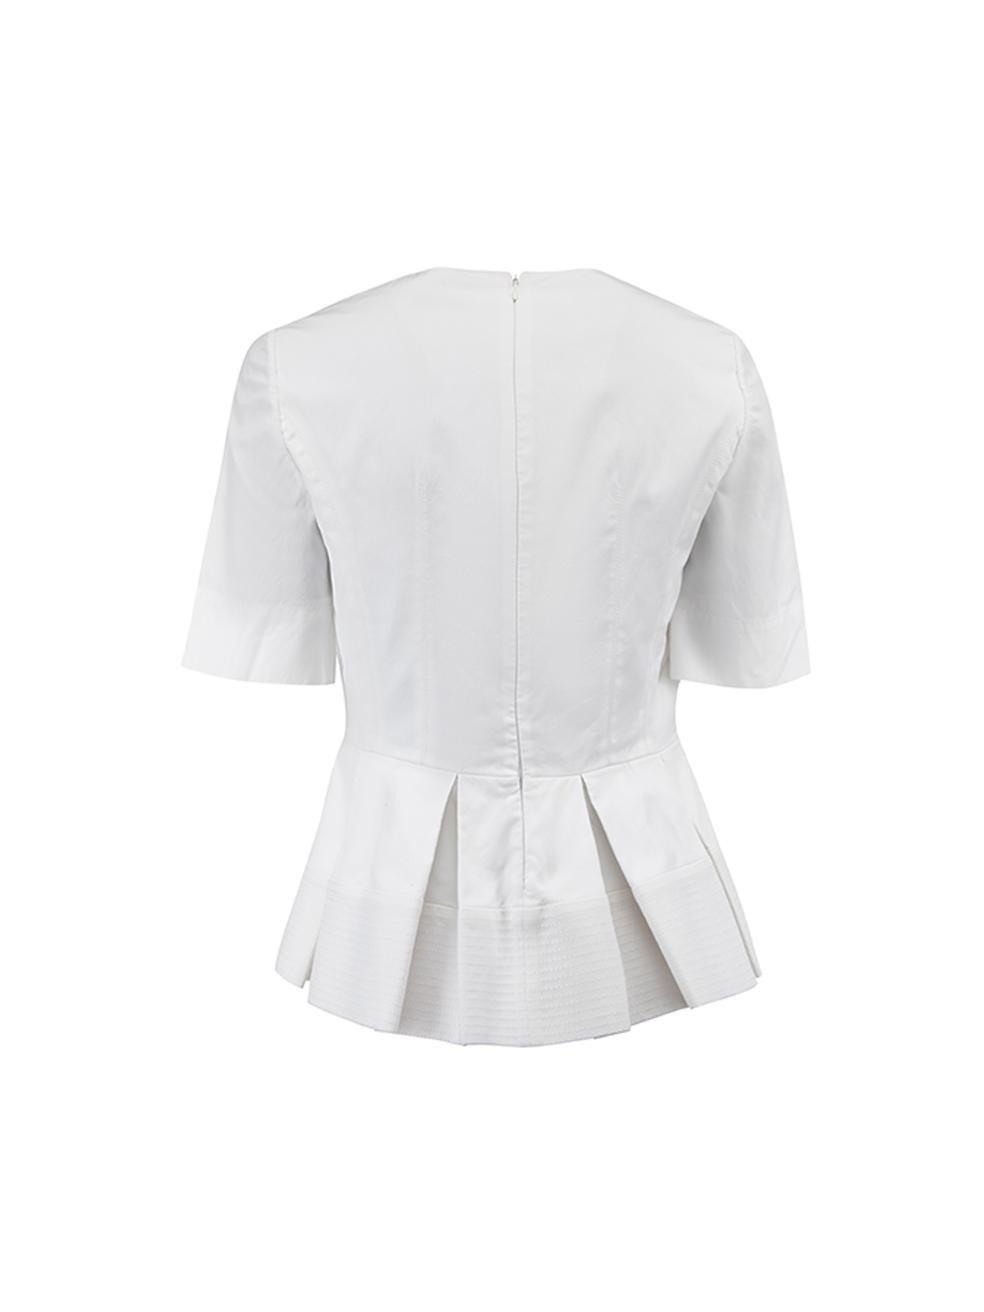 Pre-Loved Balenciaga Women's 2015 White V-Neck Peplum Top In Excellent Condition In London, GB